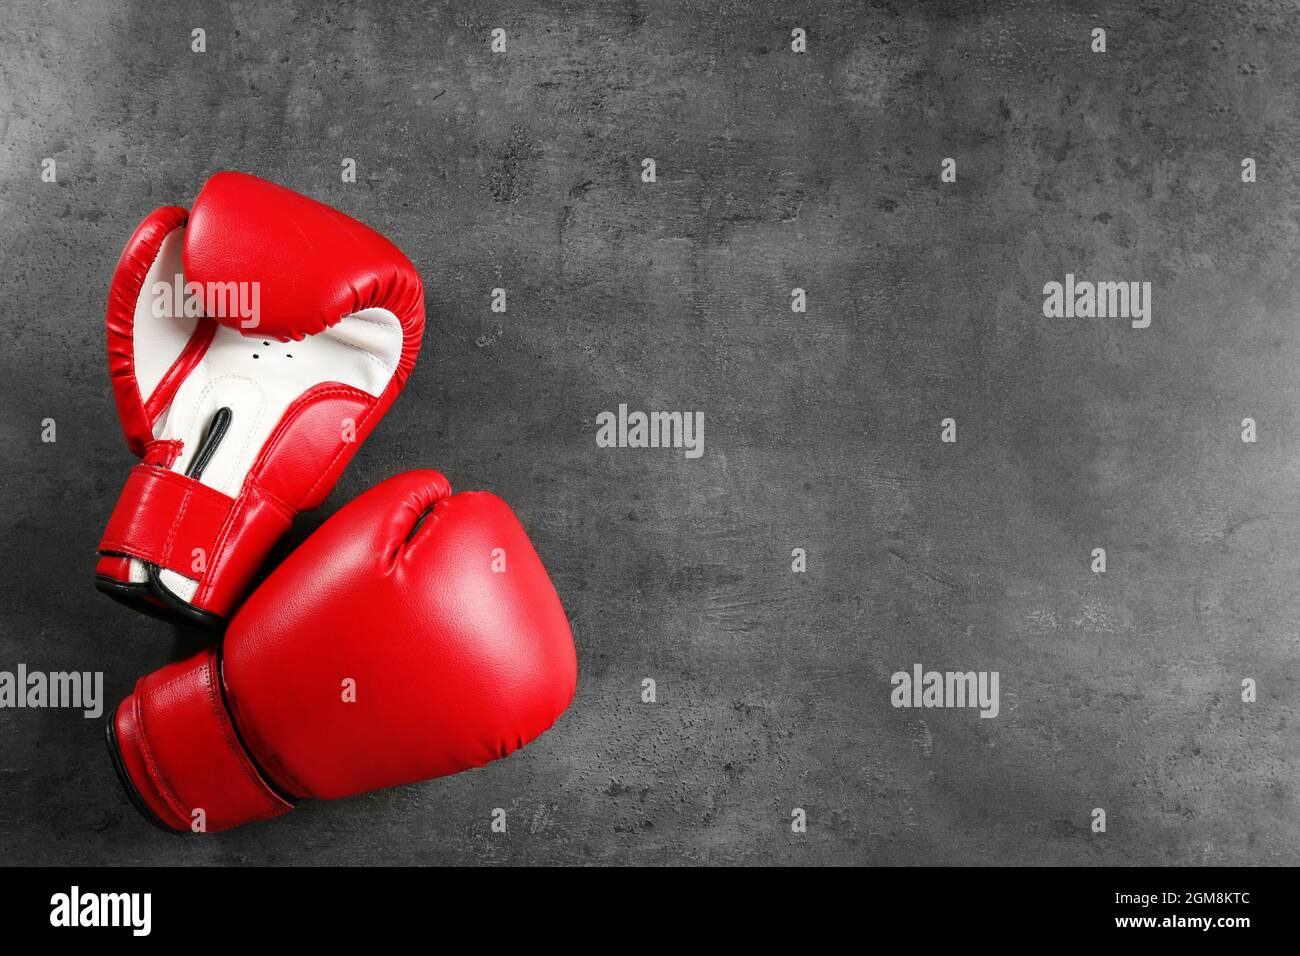 Boxing gloves with blank space for gym exercise plan on grey background. Flat lay composition Stock Photo